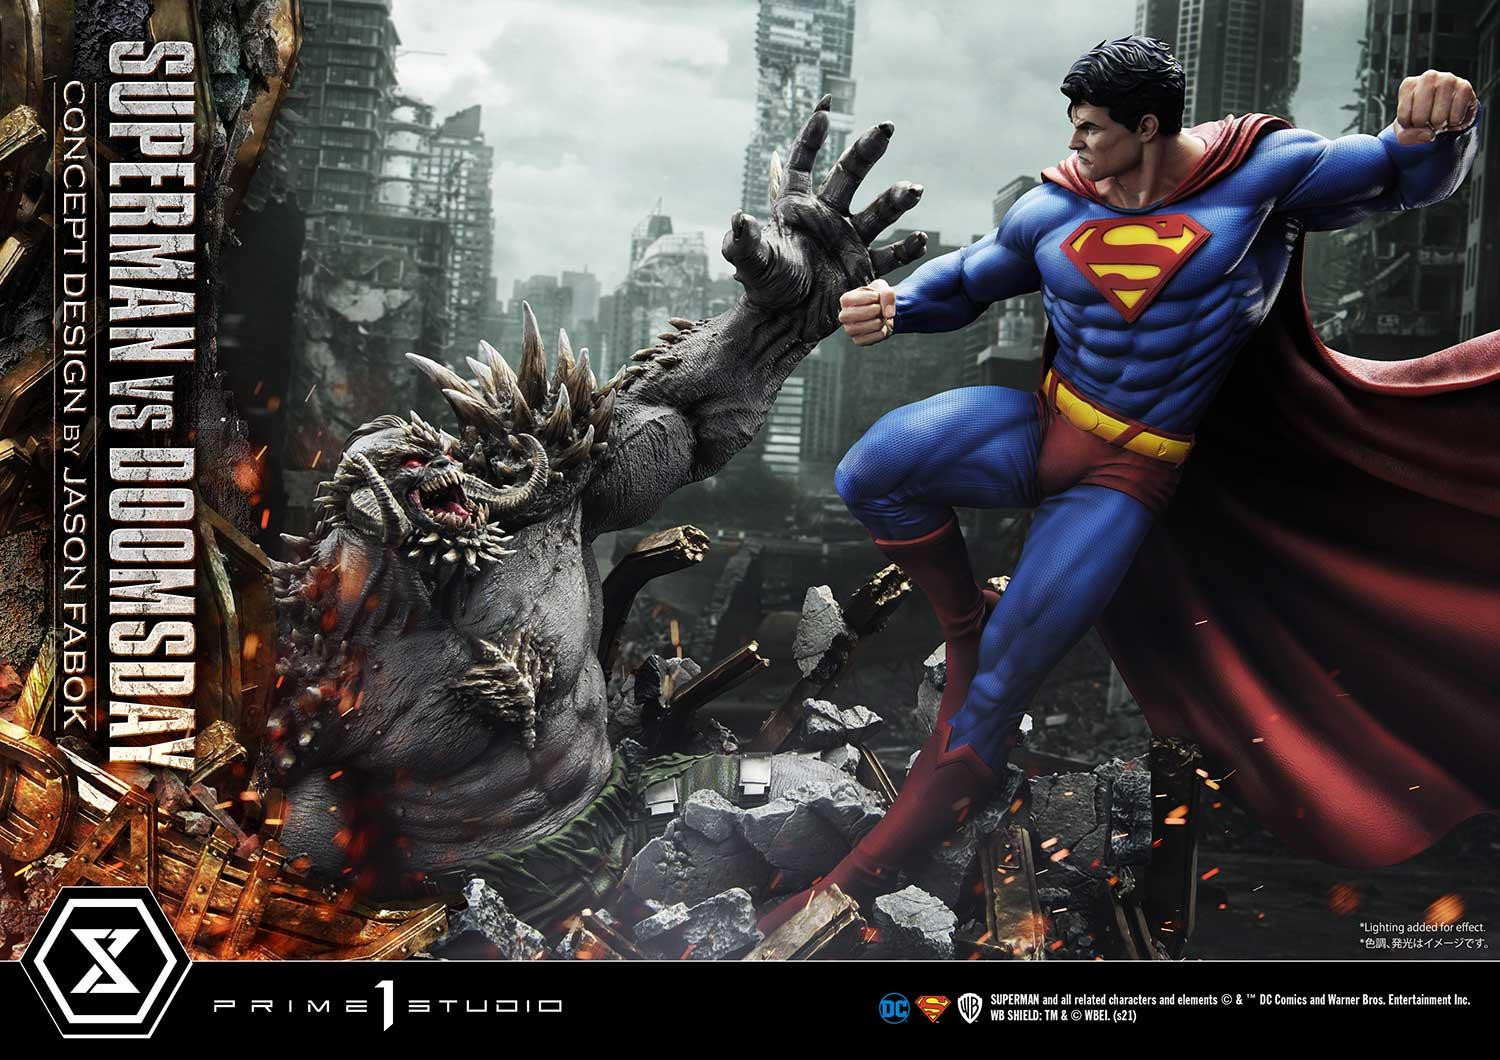 Superman Ready For Fight Wallpapers